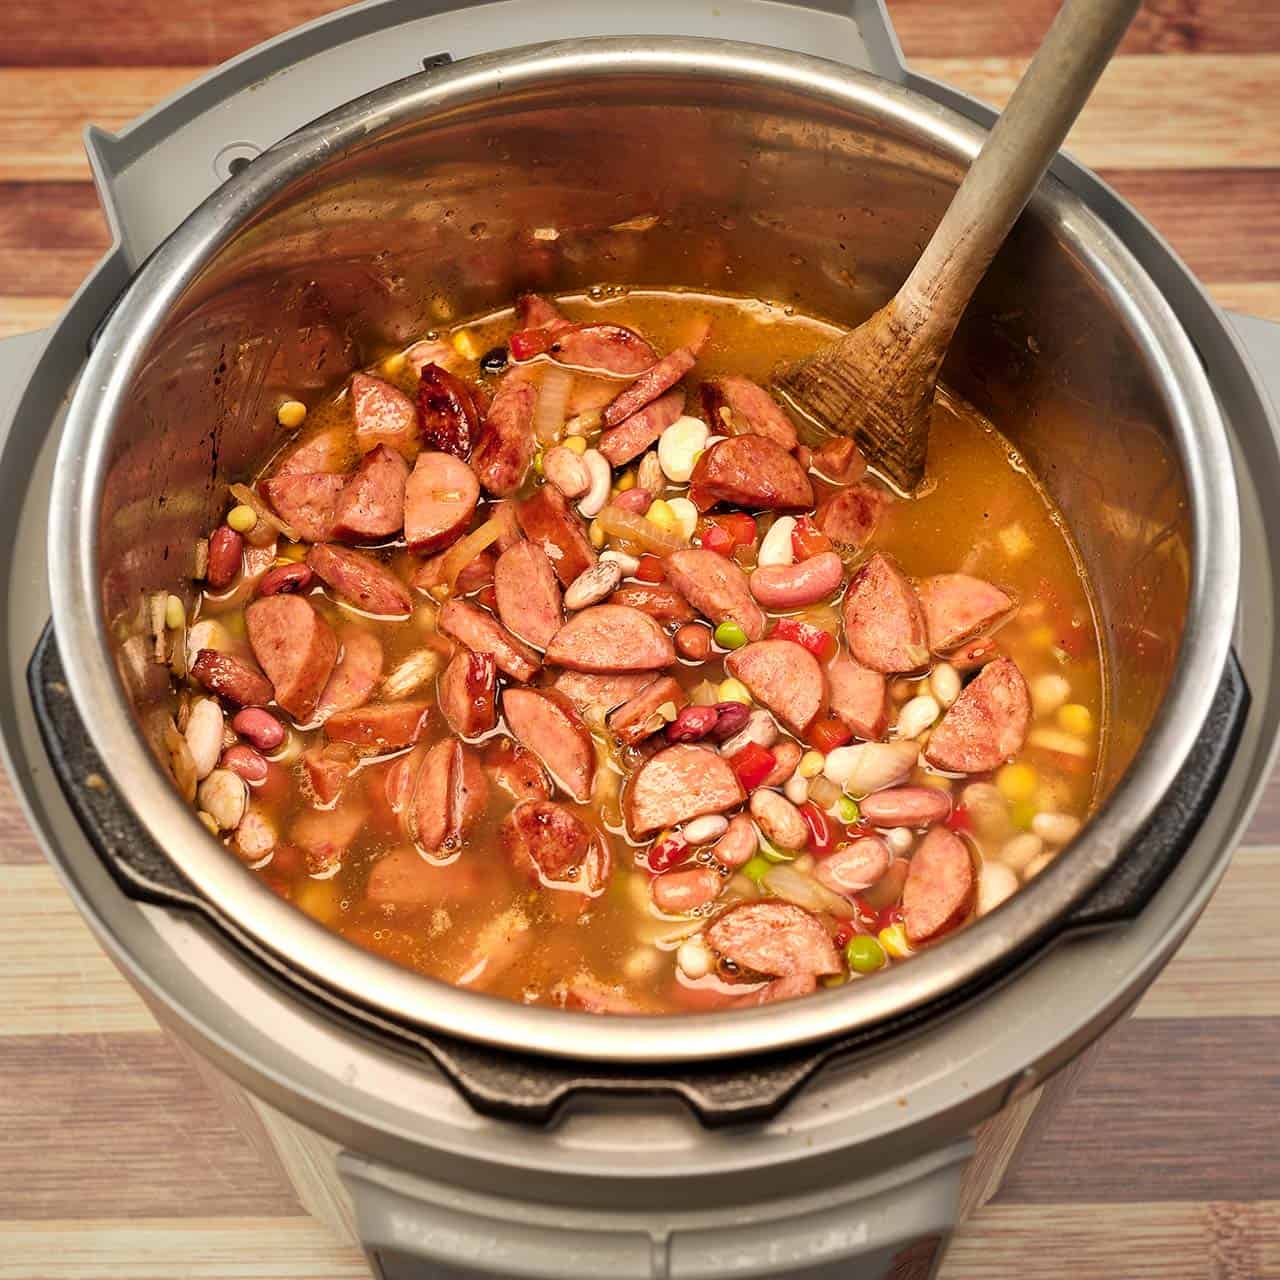 An instant pot full of beans, sausage, and broth, ready to cook